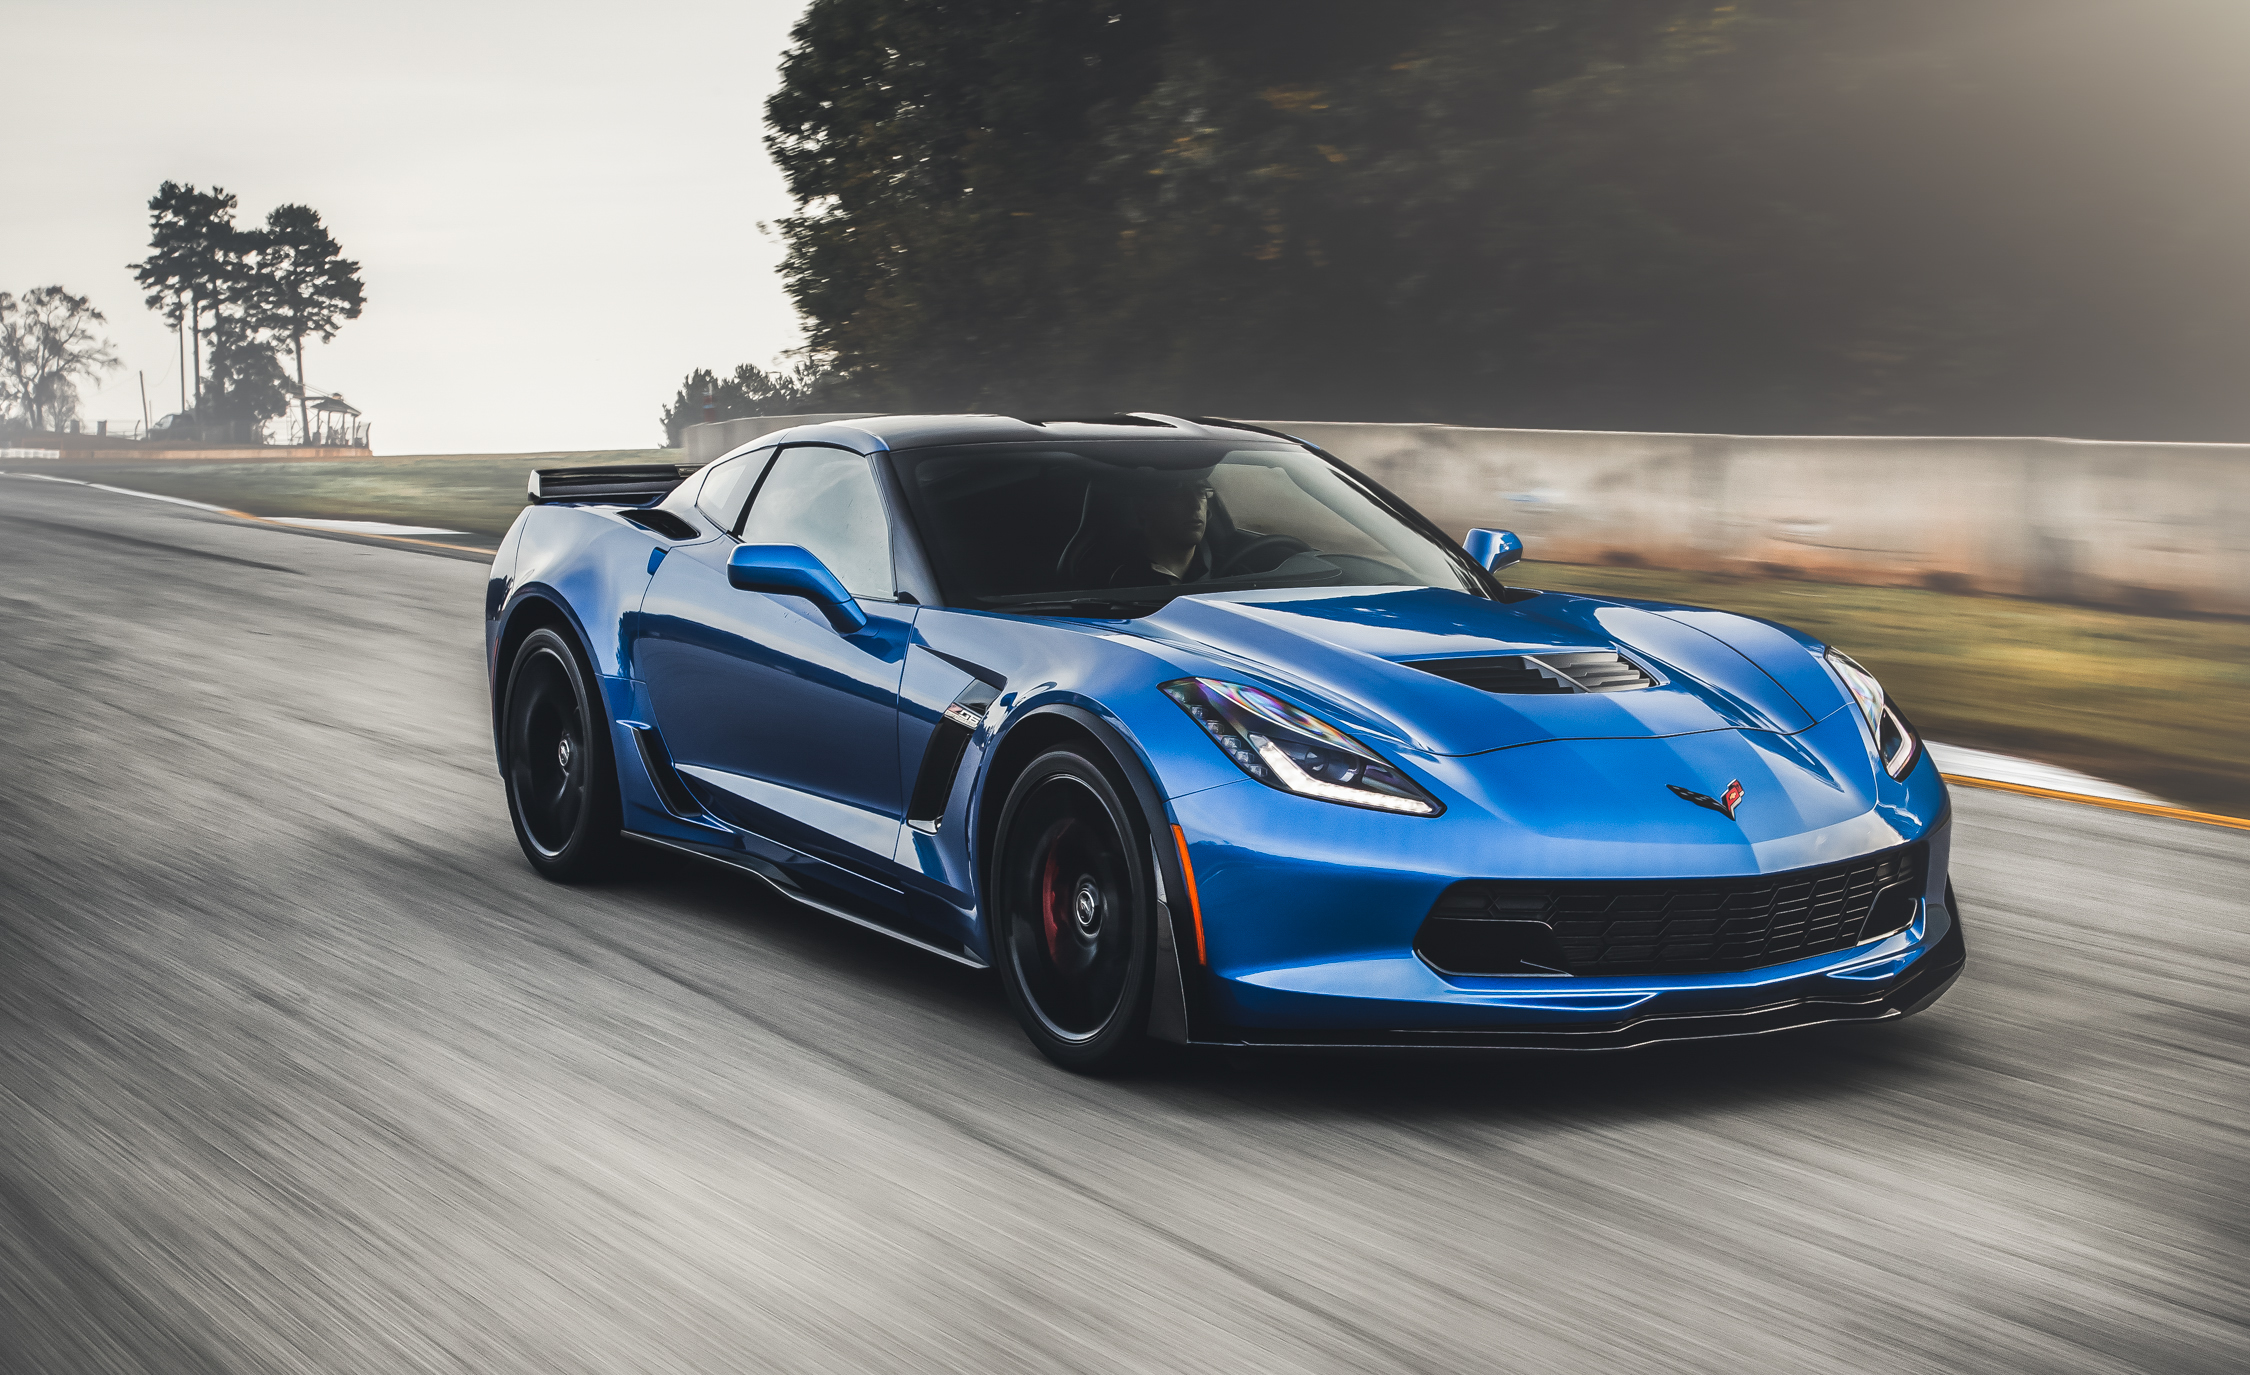 How-To Spotlight: Tracking Your Corvette on a Budget